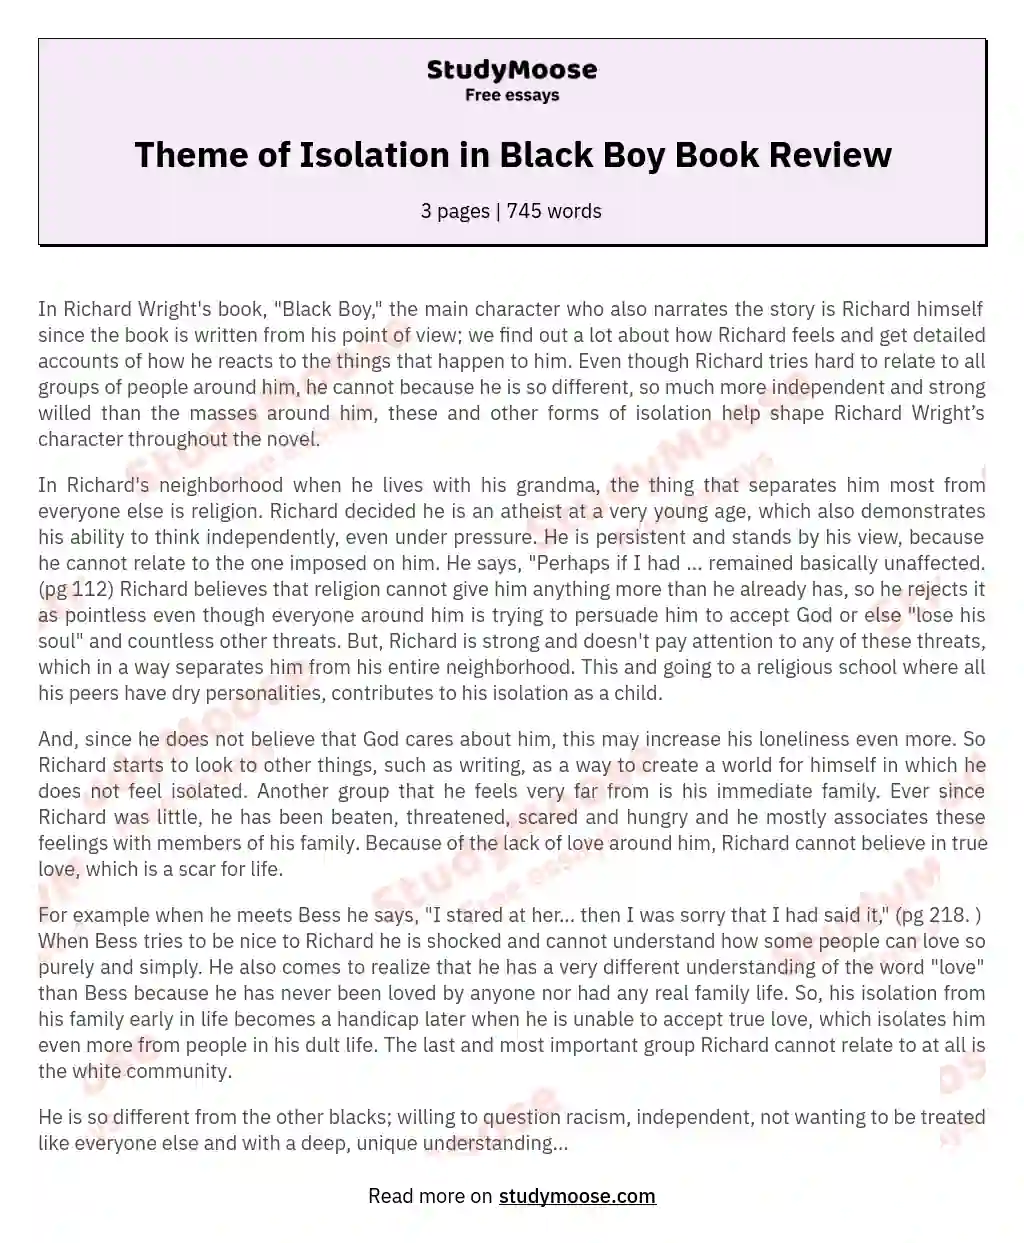 Theme of Isolation in Black Boy Book Review